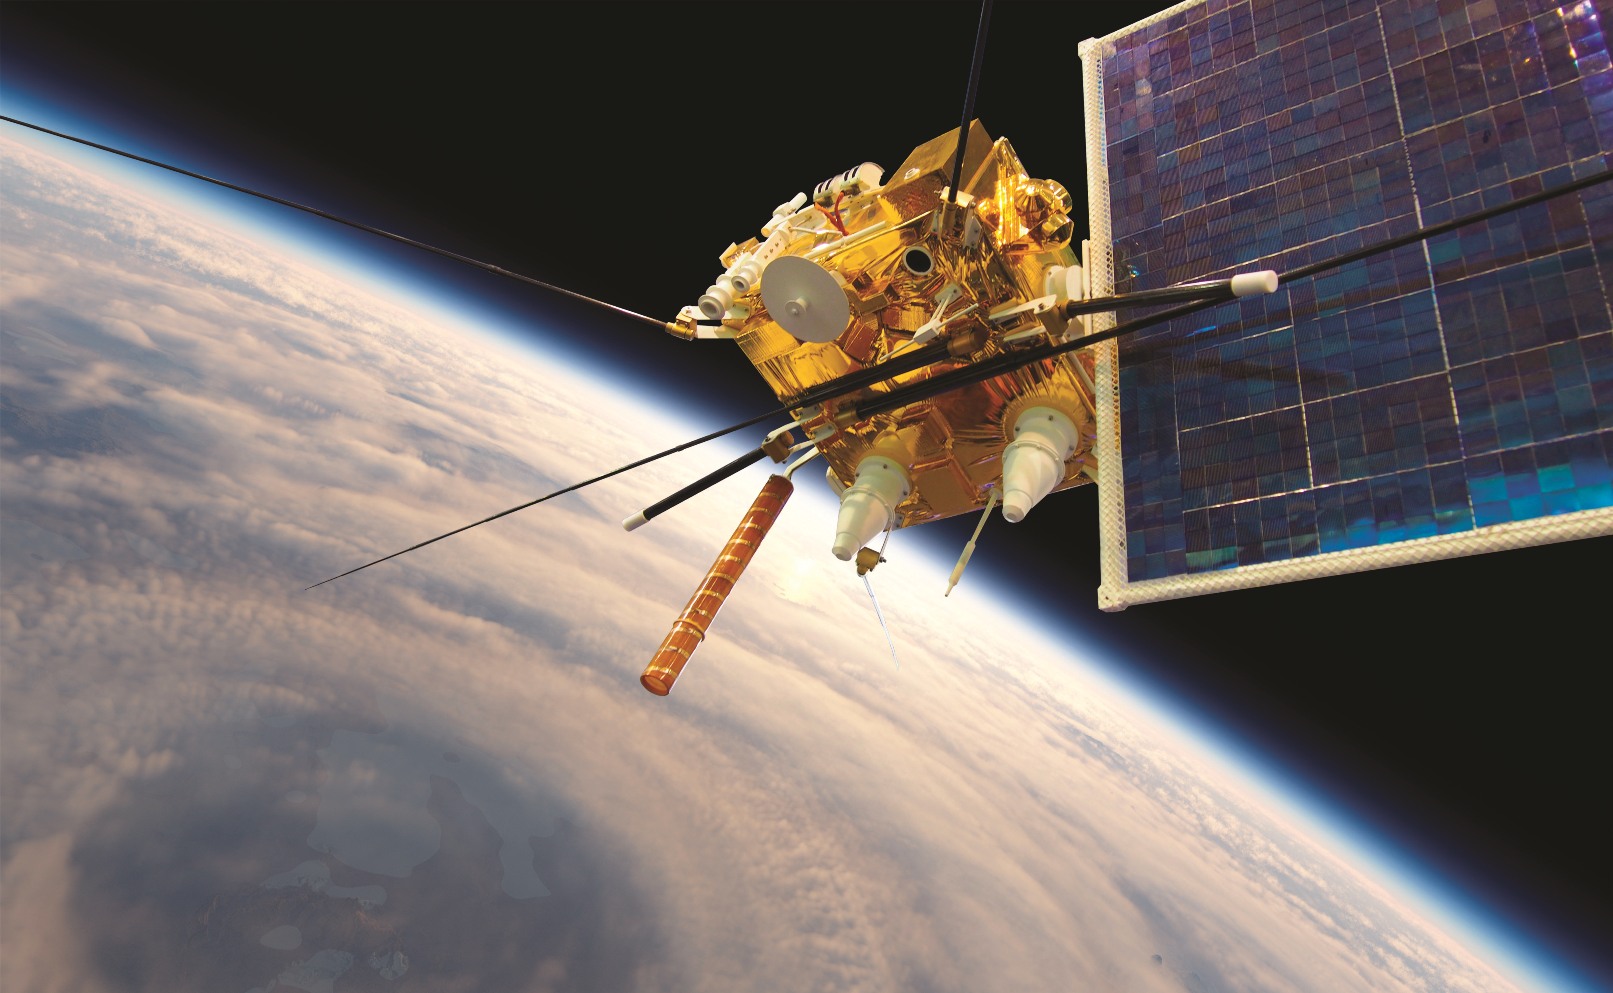 ESA satellites will replace radio communications with optical lasers